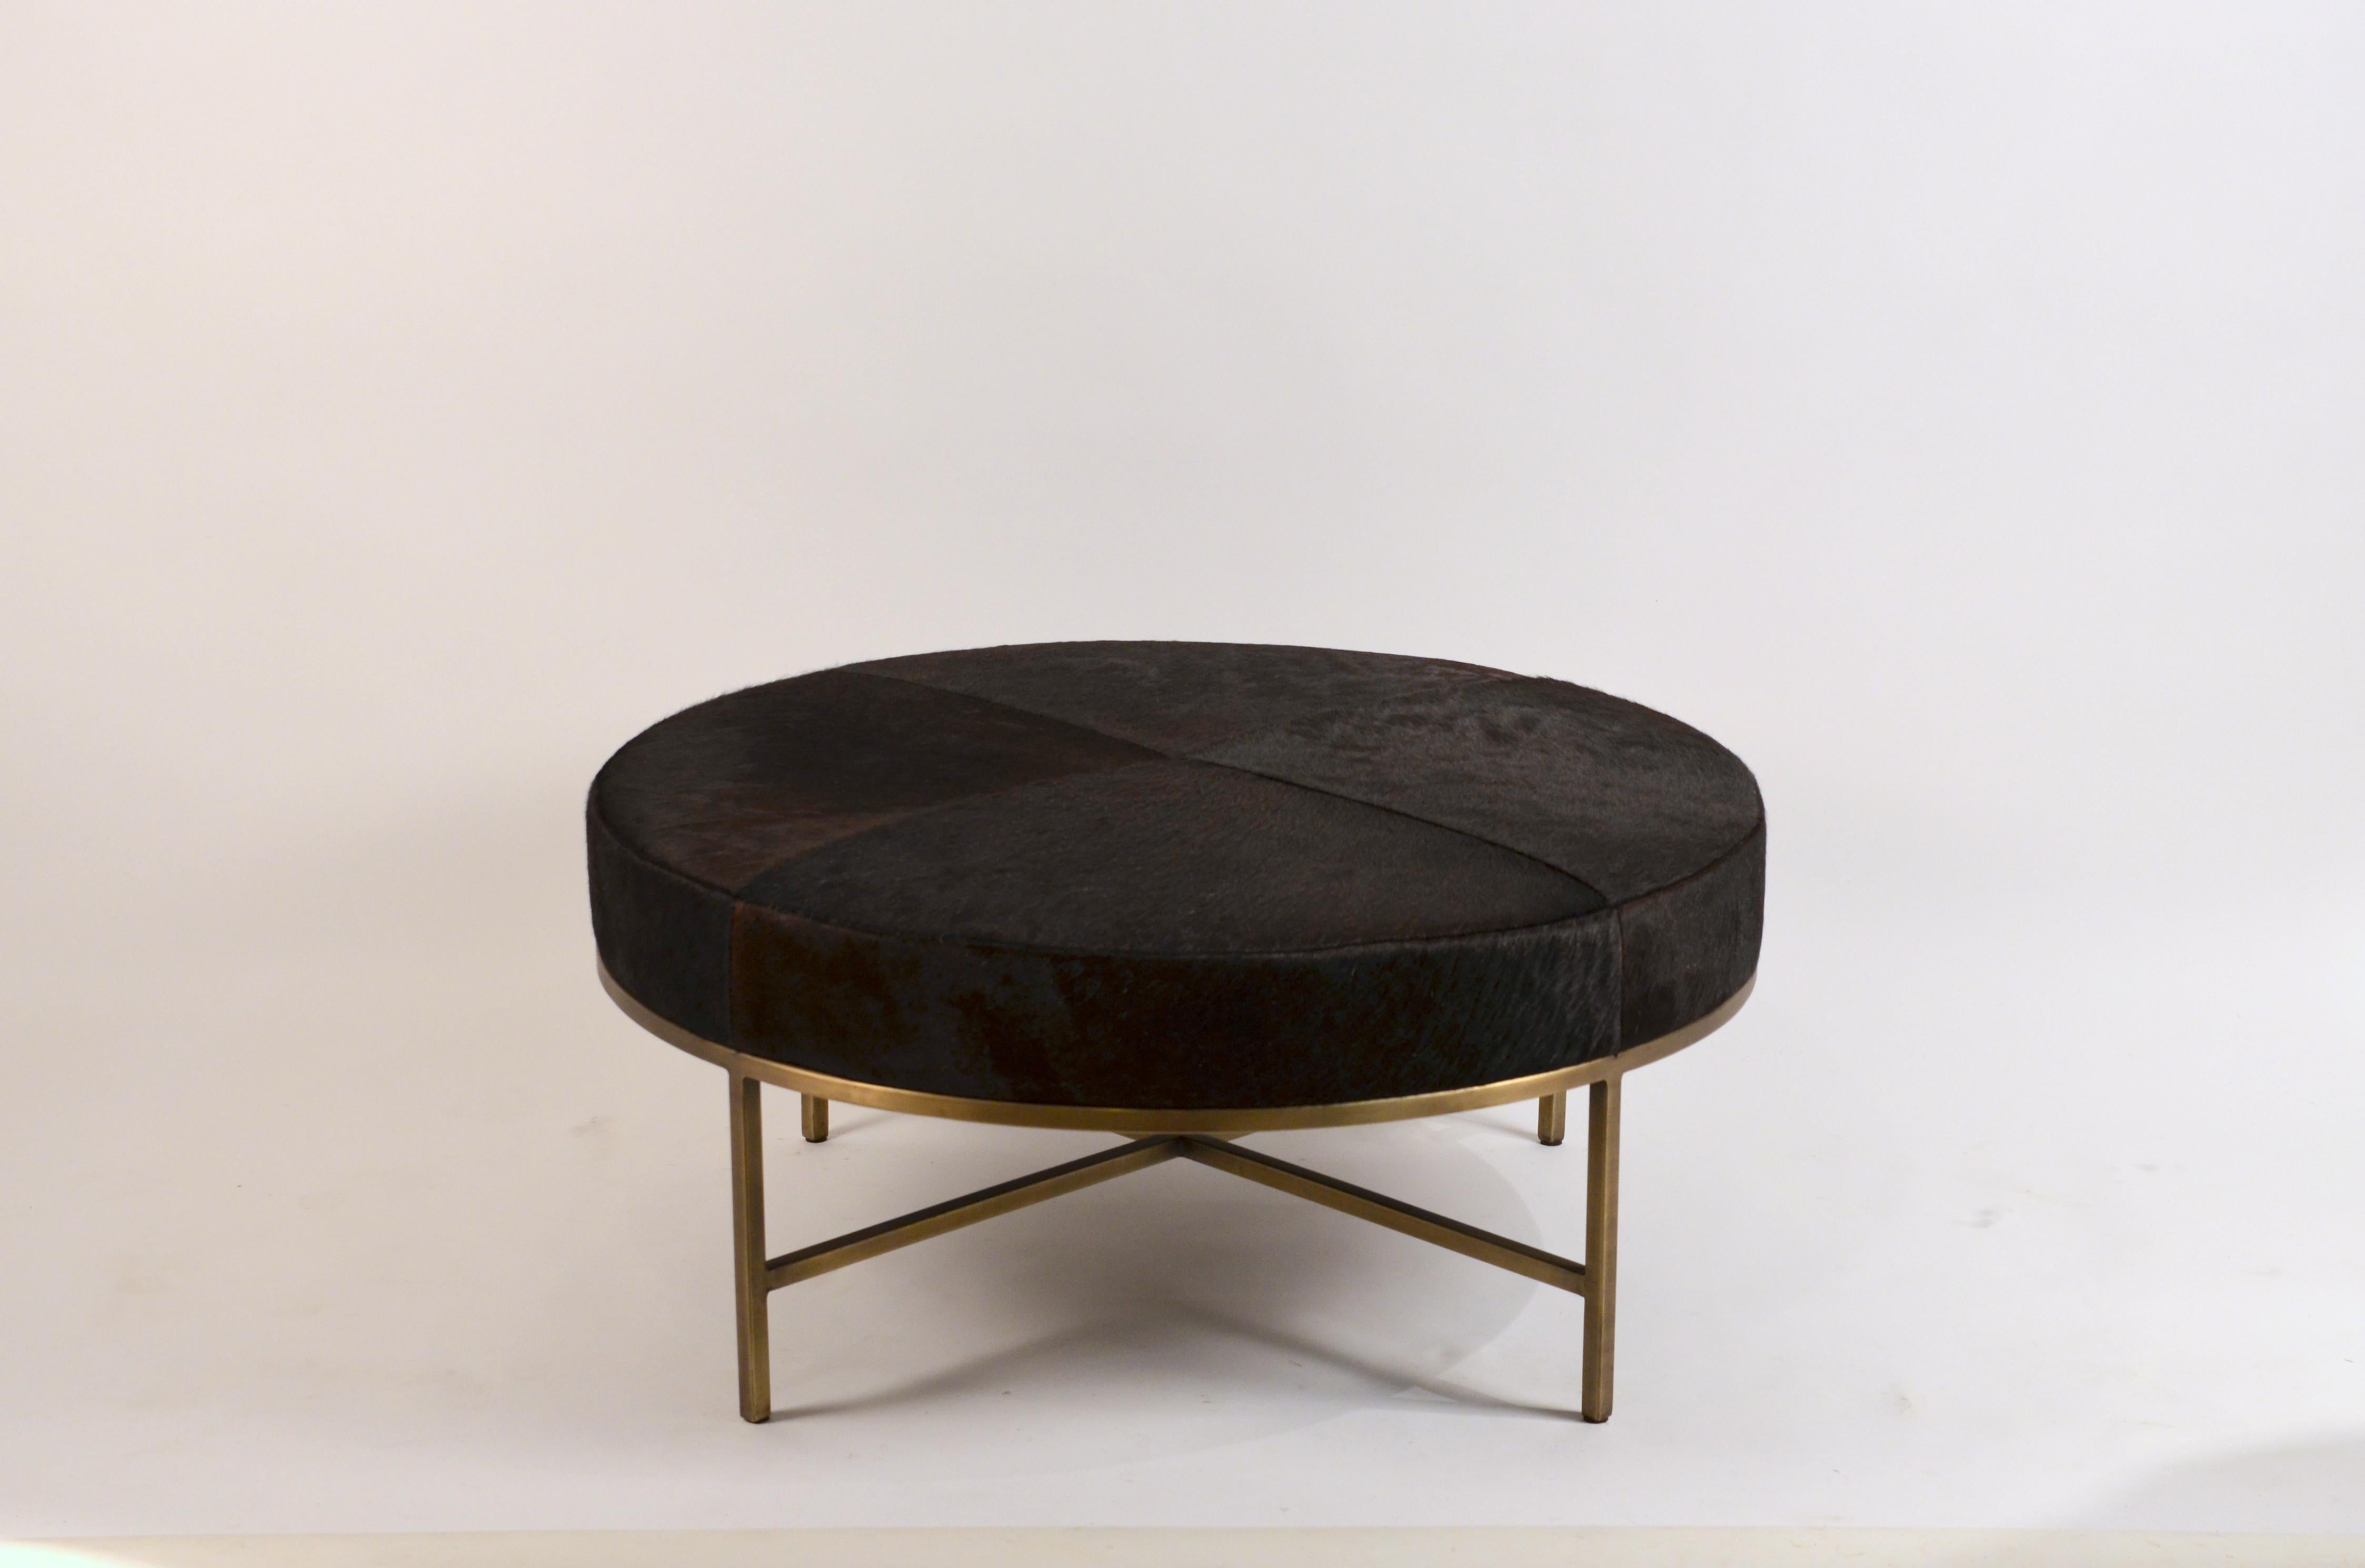 Chic 'Tambour' antiqued brass and dark brown hide ottoman by Design Frères.

38 in. diameter x 16.5 in. tall (other sizes available).

Upholstered on the firmer side, so it can also be used as a coffee table, with a tray, to place books, etc.